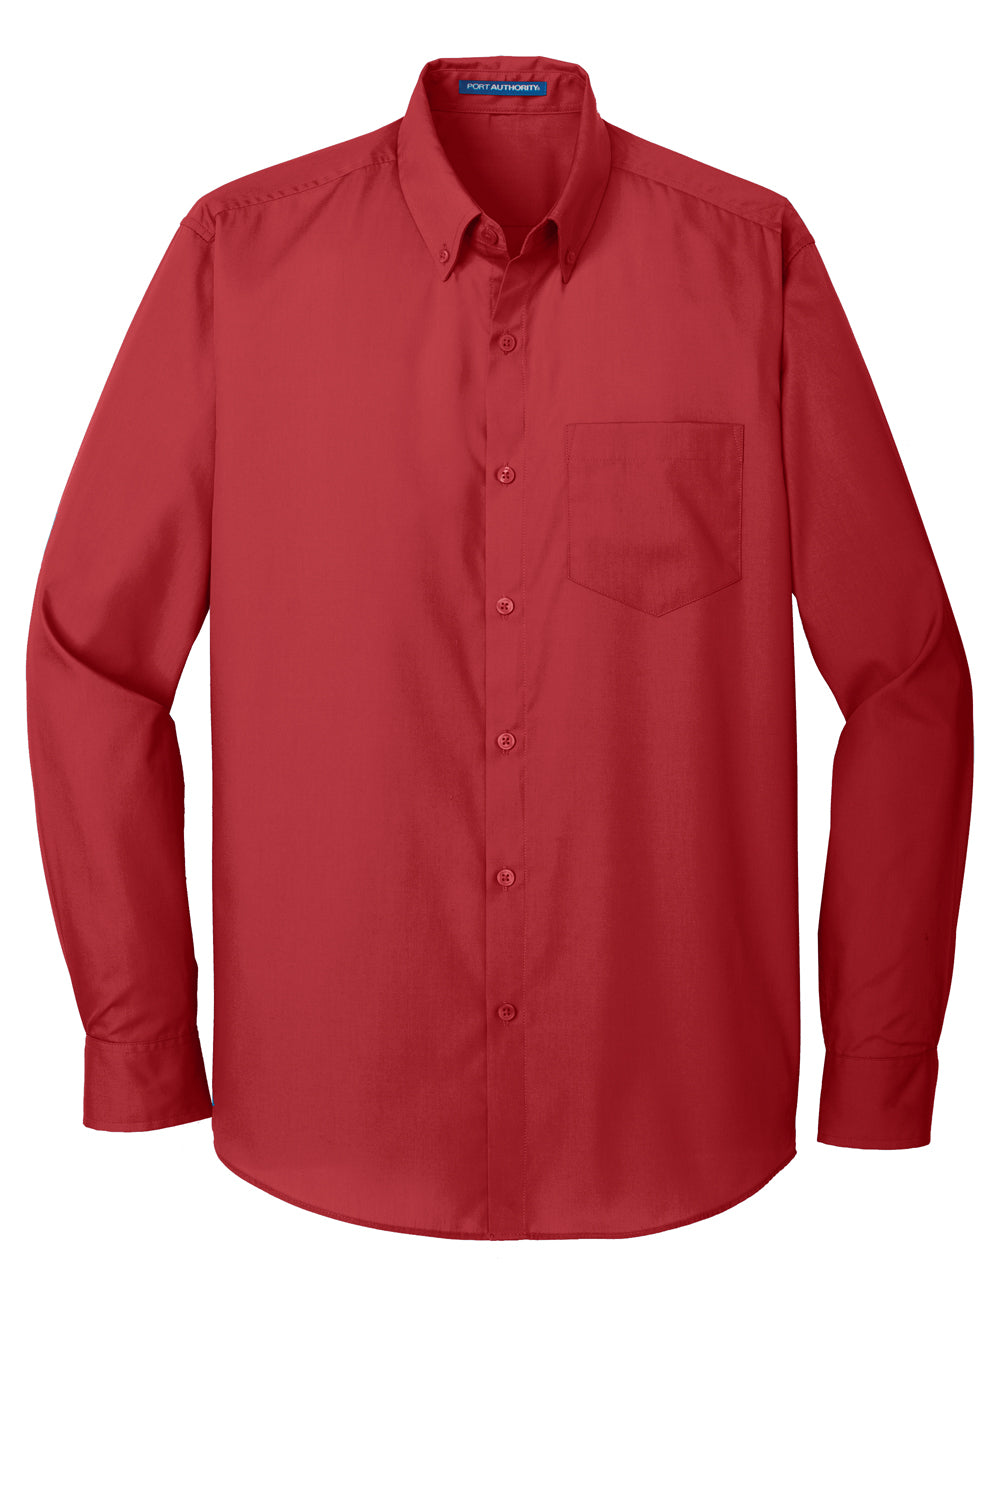 Port Authority W100/TW100 Carefree Stain Resistant Long Sleeve Button Down Shirt w/ Pocket Rich Red Flat Front